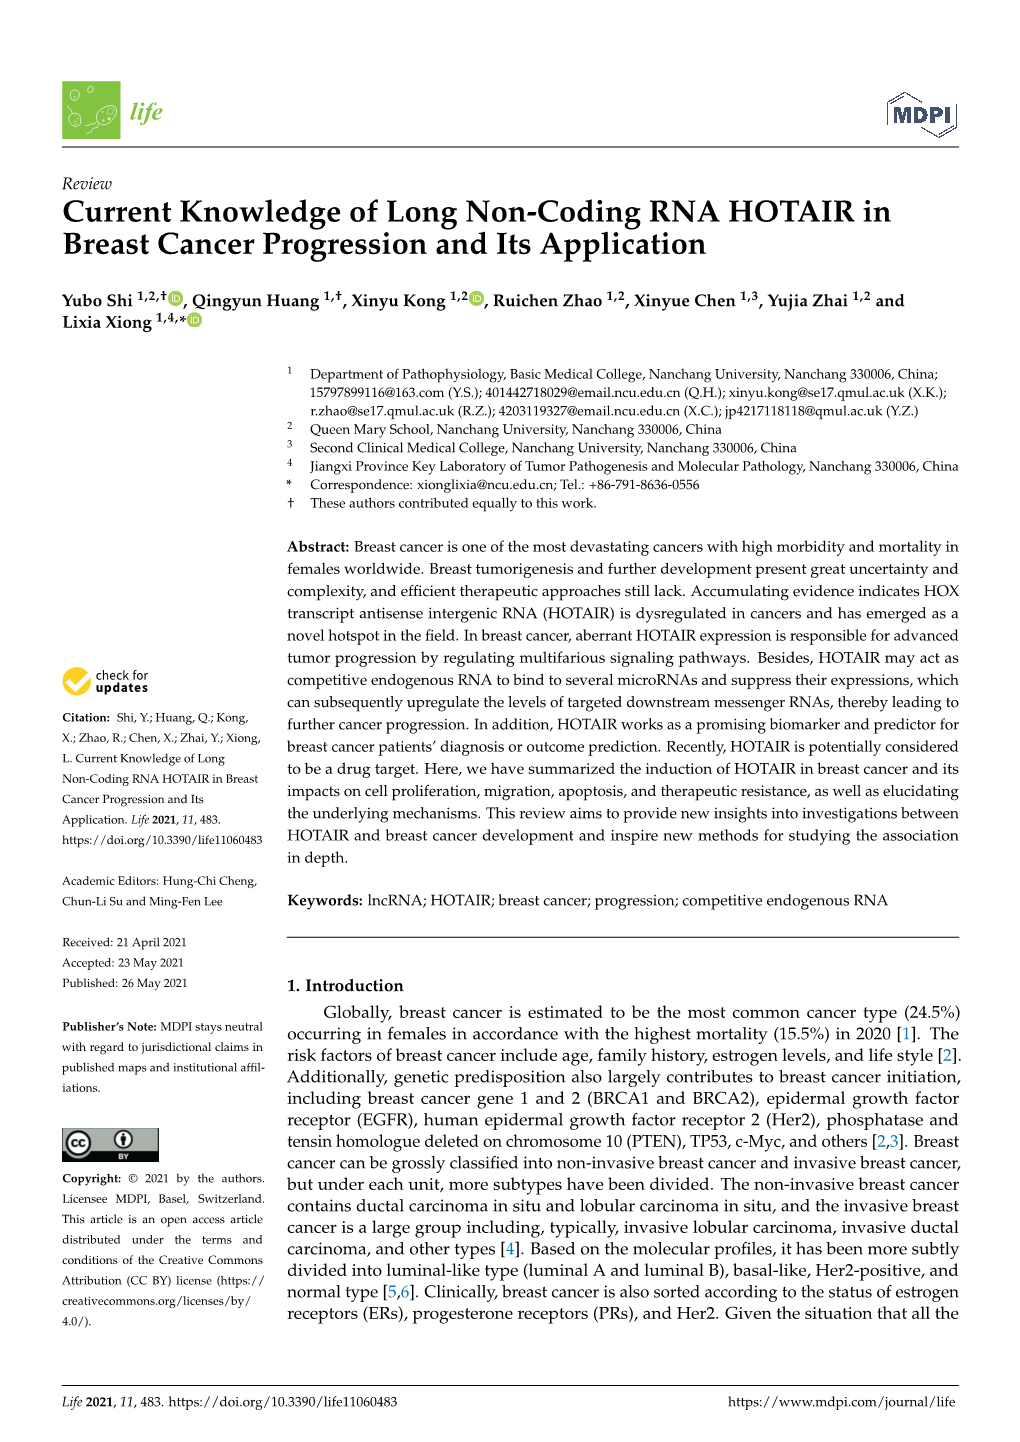 Current Knowledge of Long Non-Coding RNA HOTAIR in Breast Cancer Progression and Its Application